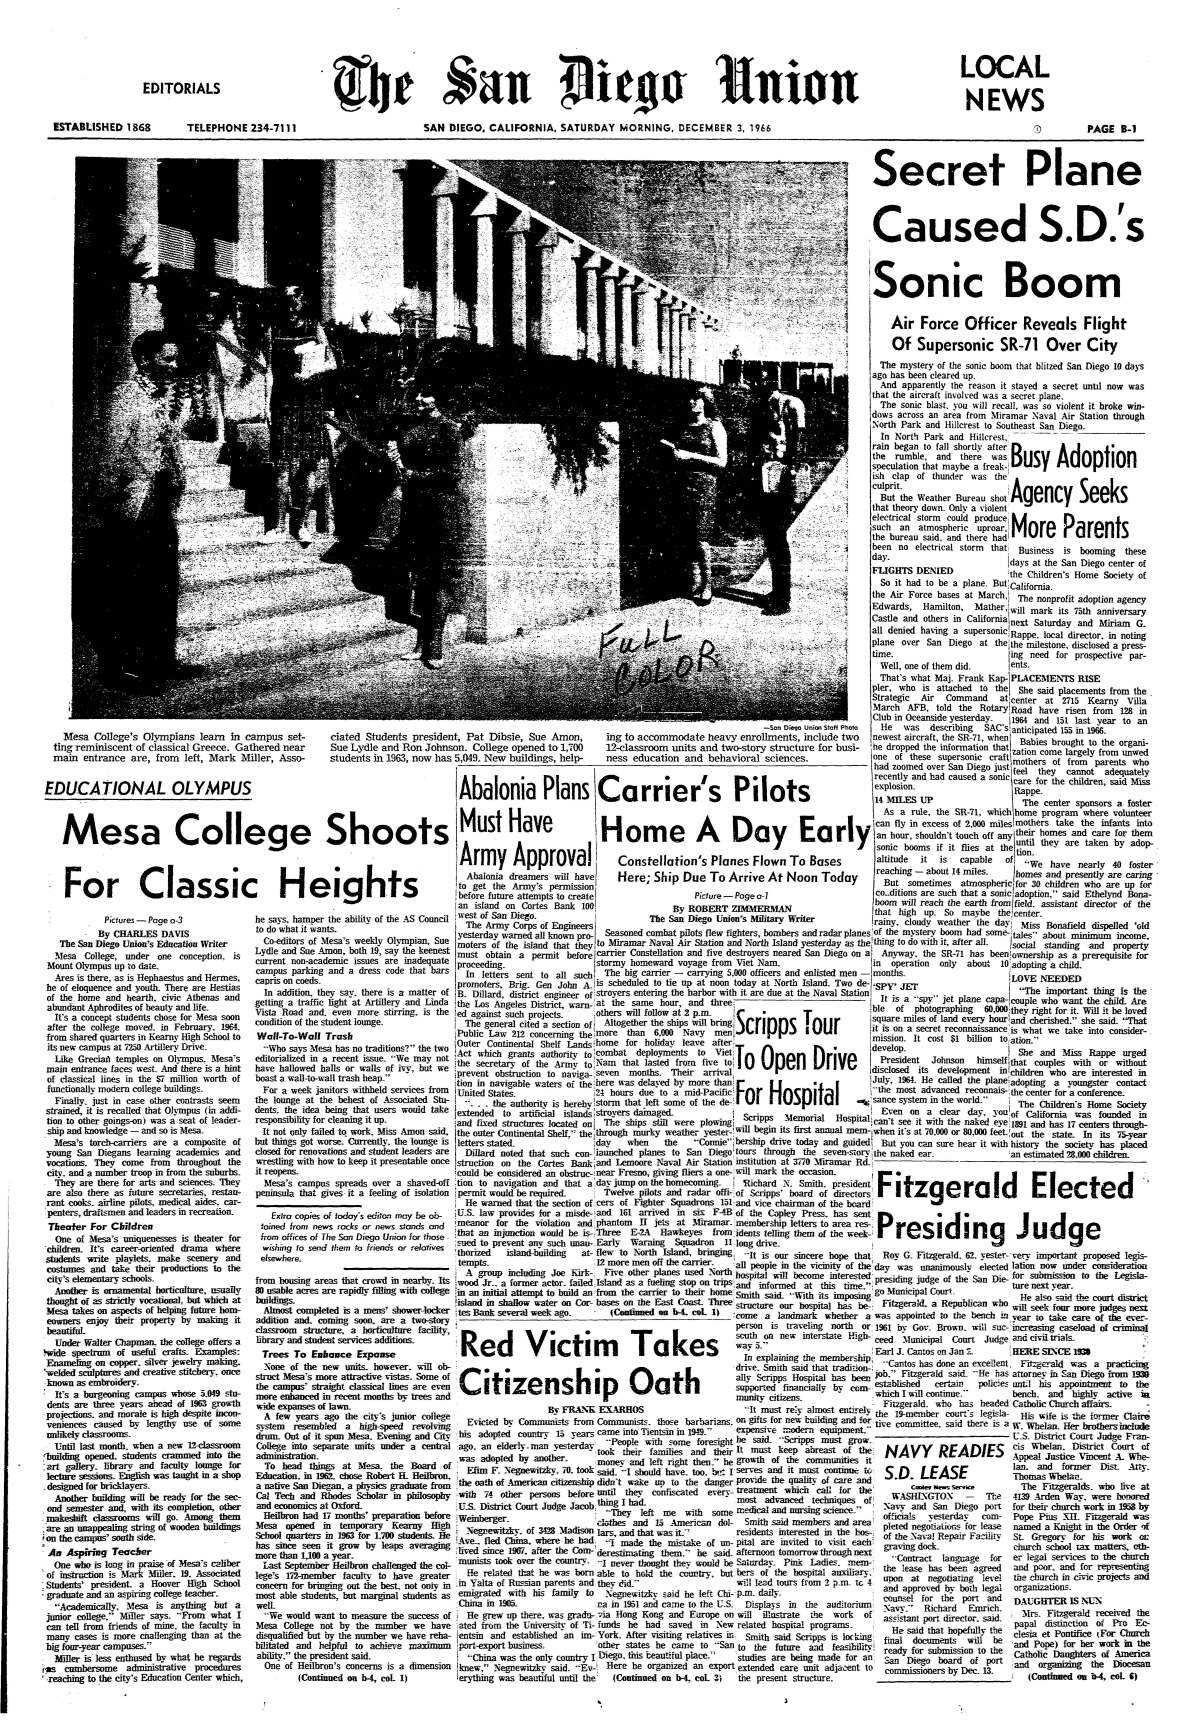 "Secret Plane Caused S.D.'s Sonic Boom," article on page B-1 of The San Diego Union, Dec. 3, 1966.